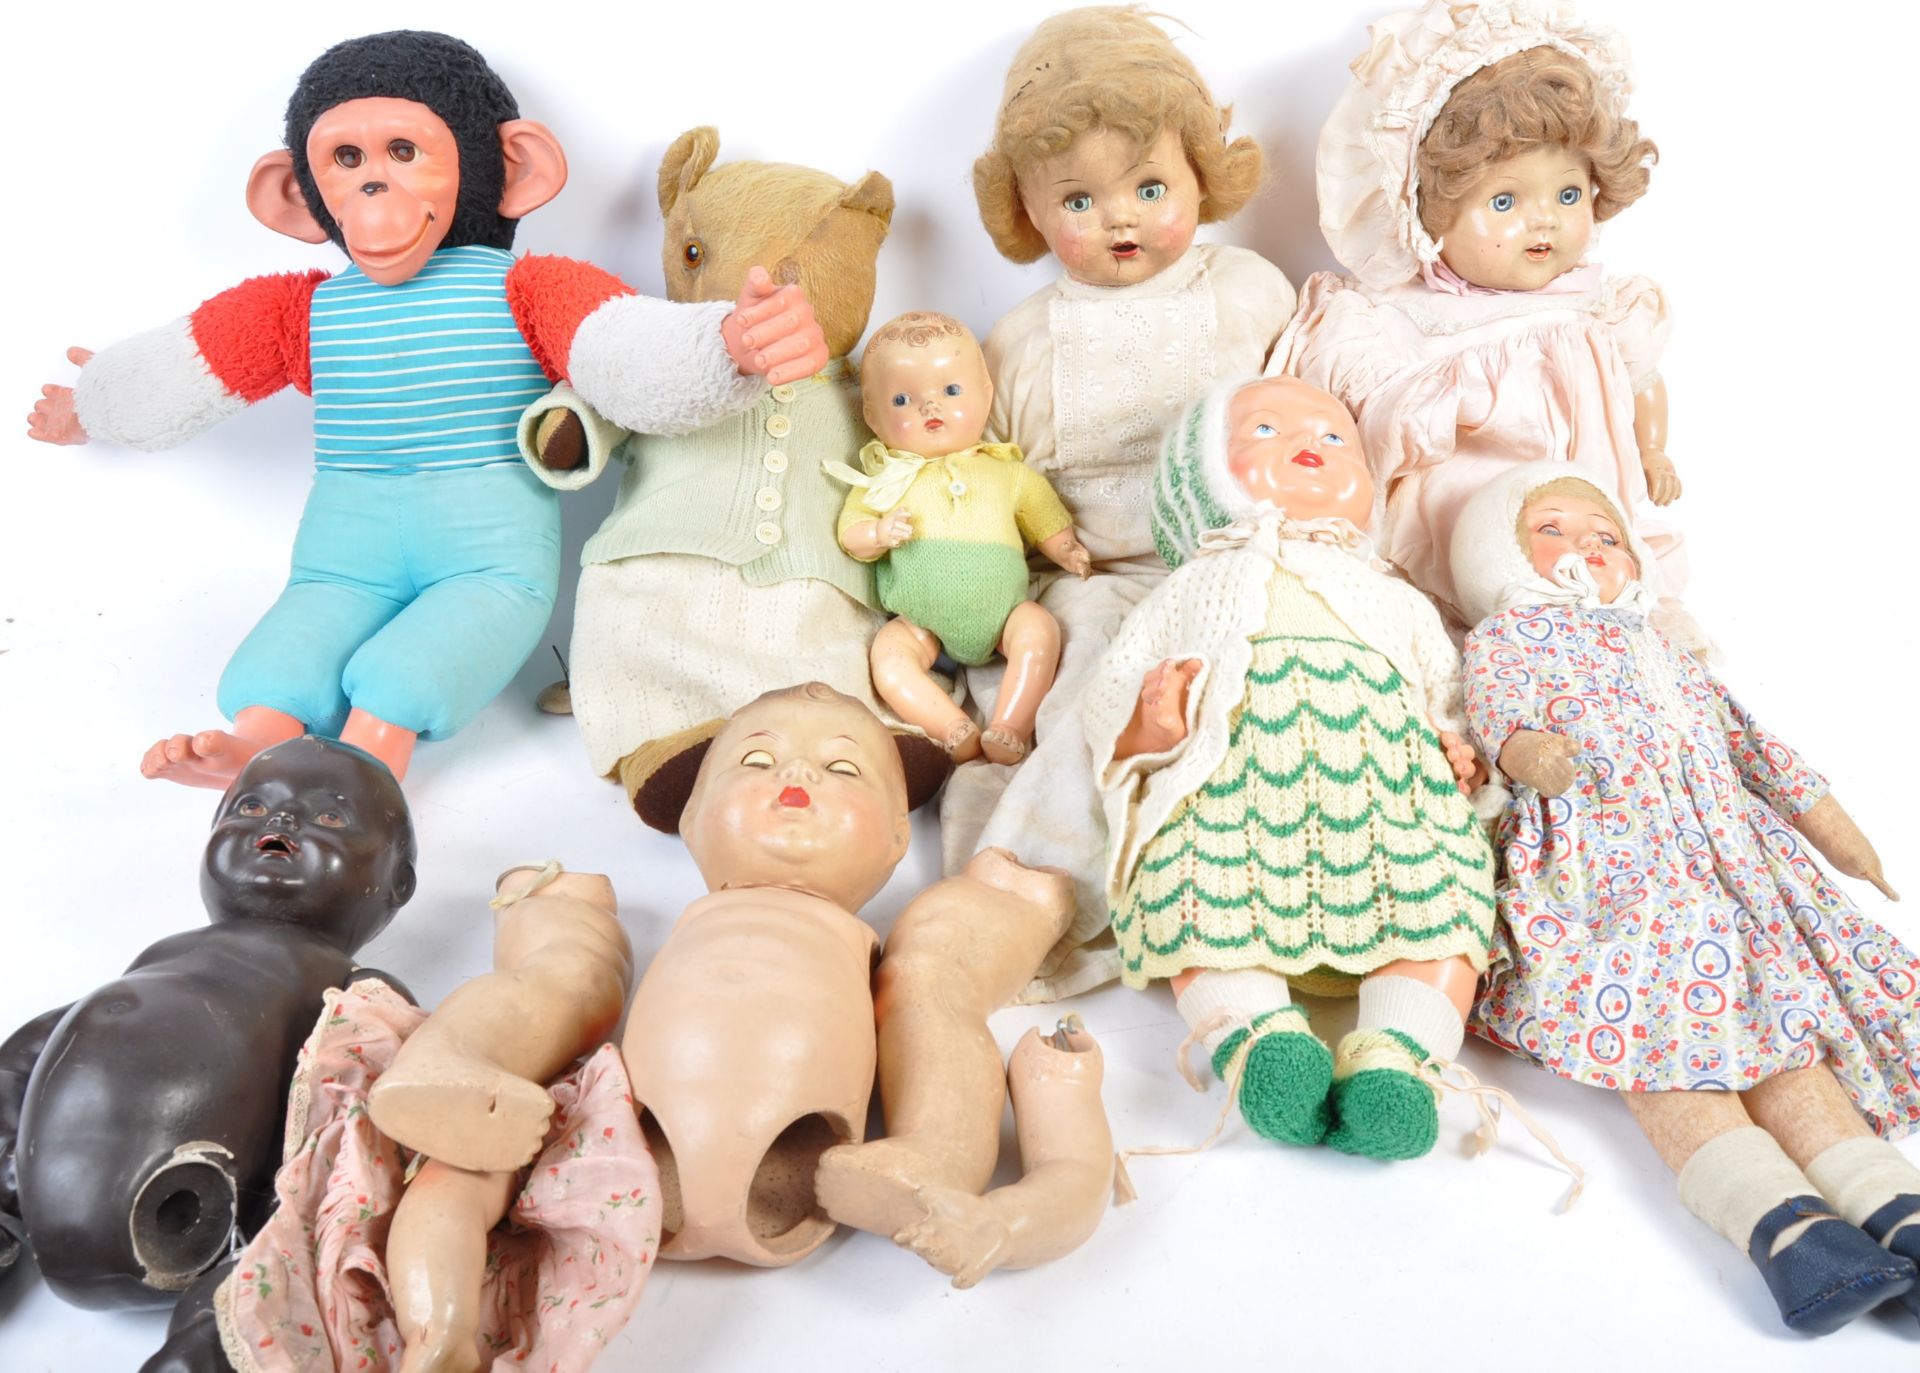 A COLLECTION OF COMPOSITION BODY DOLLS AND TEDDY BEARS